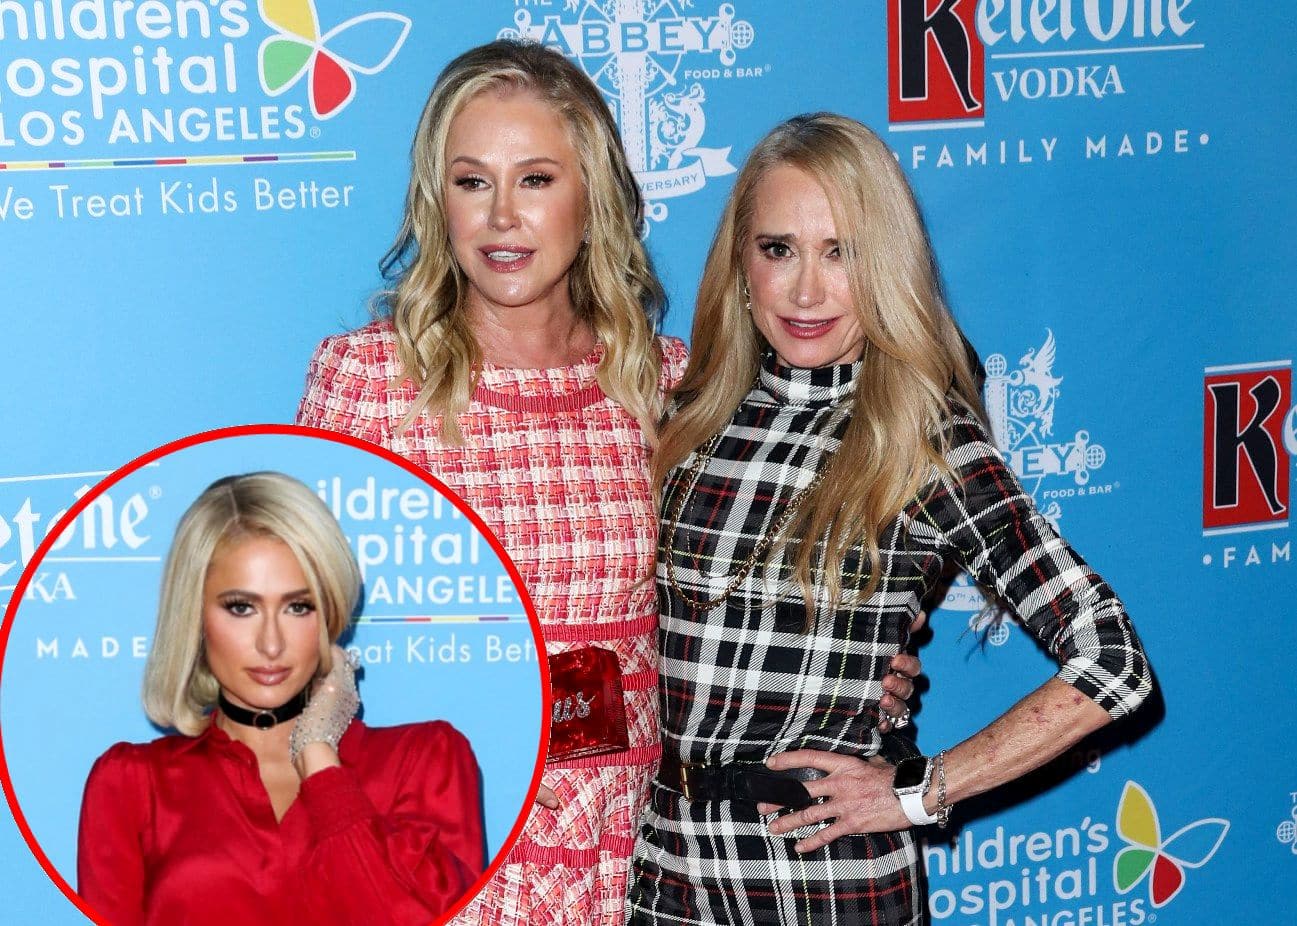 Kathy Hilton Reveals if Kim Richards Was Upset About Paris Hilton's No Phone Rule at Wedding, Shares Which RHOBH Cast Member She Spends the Most Time With, and Reacts to Paris' Documentary